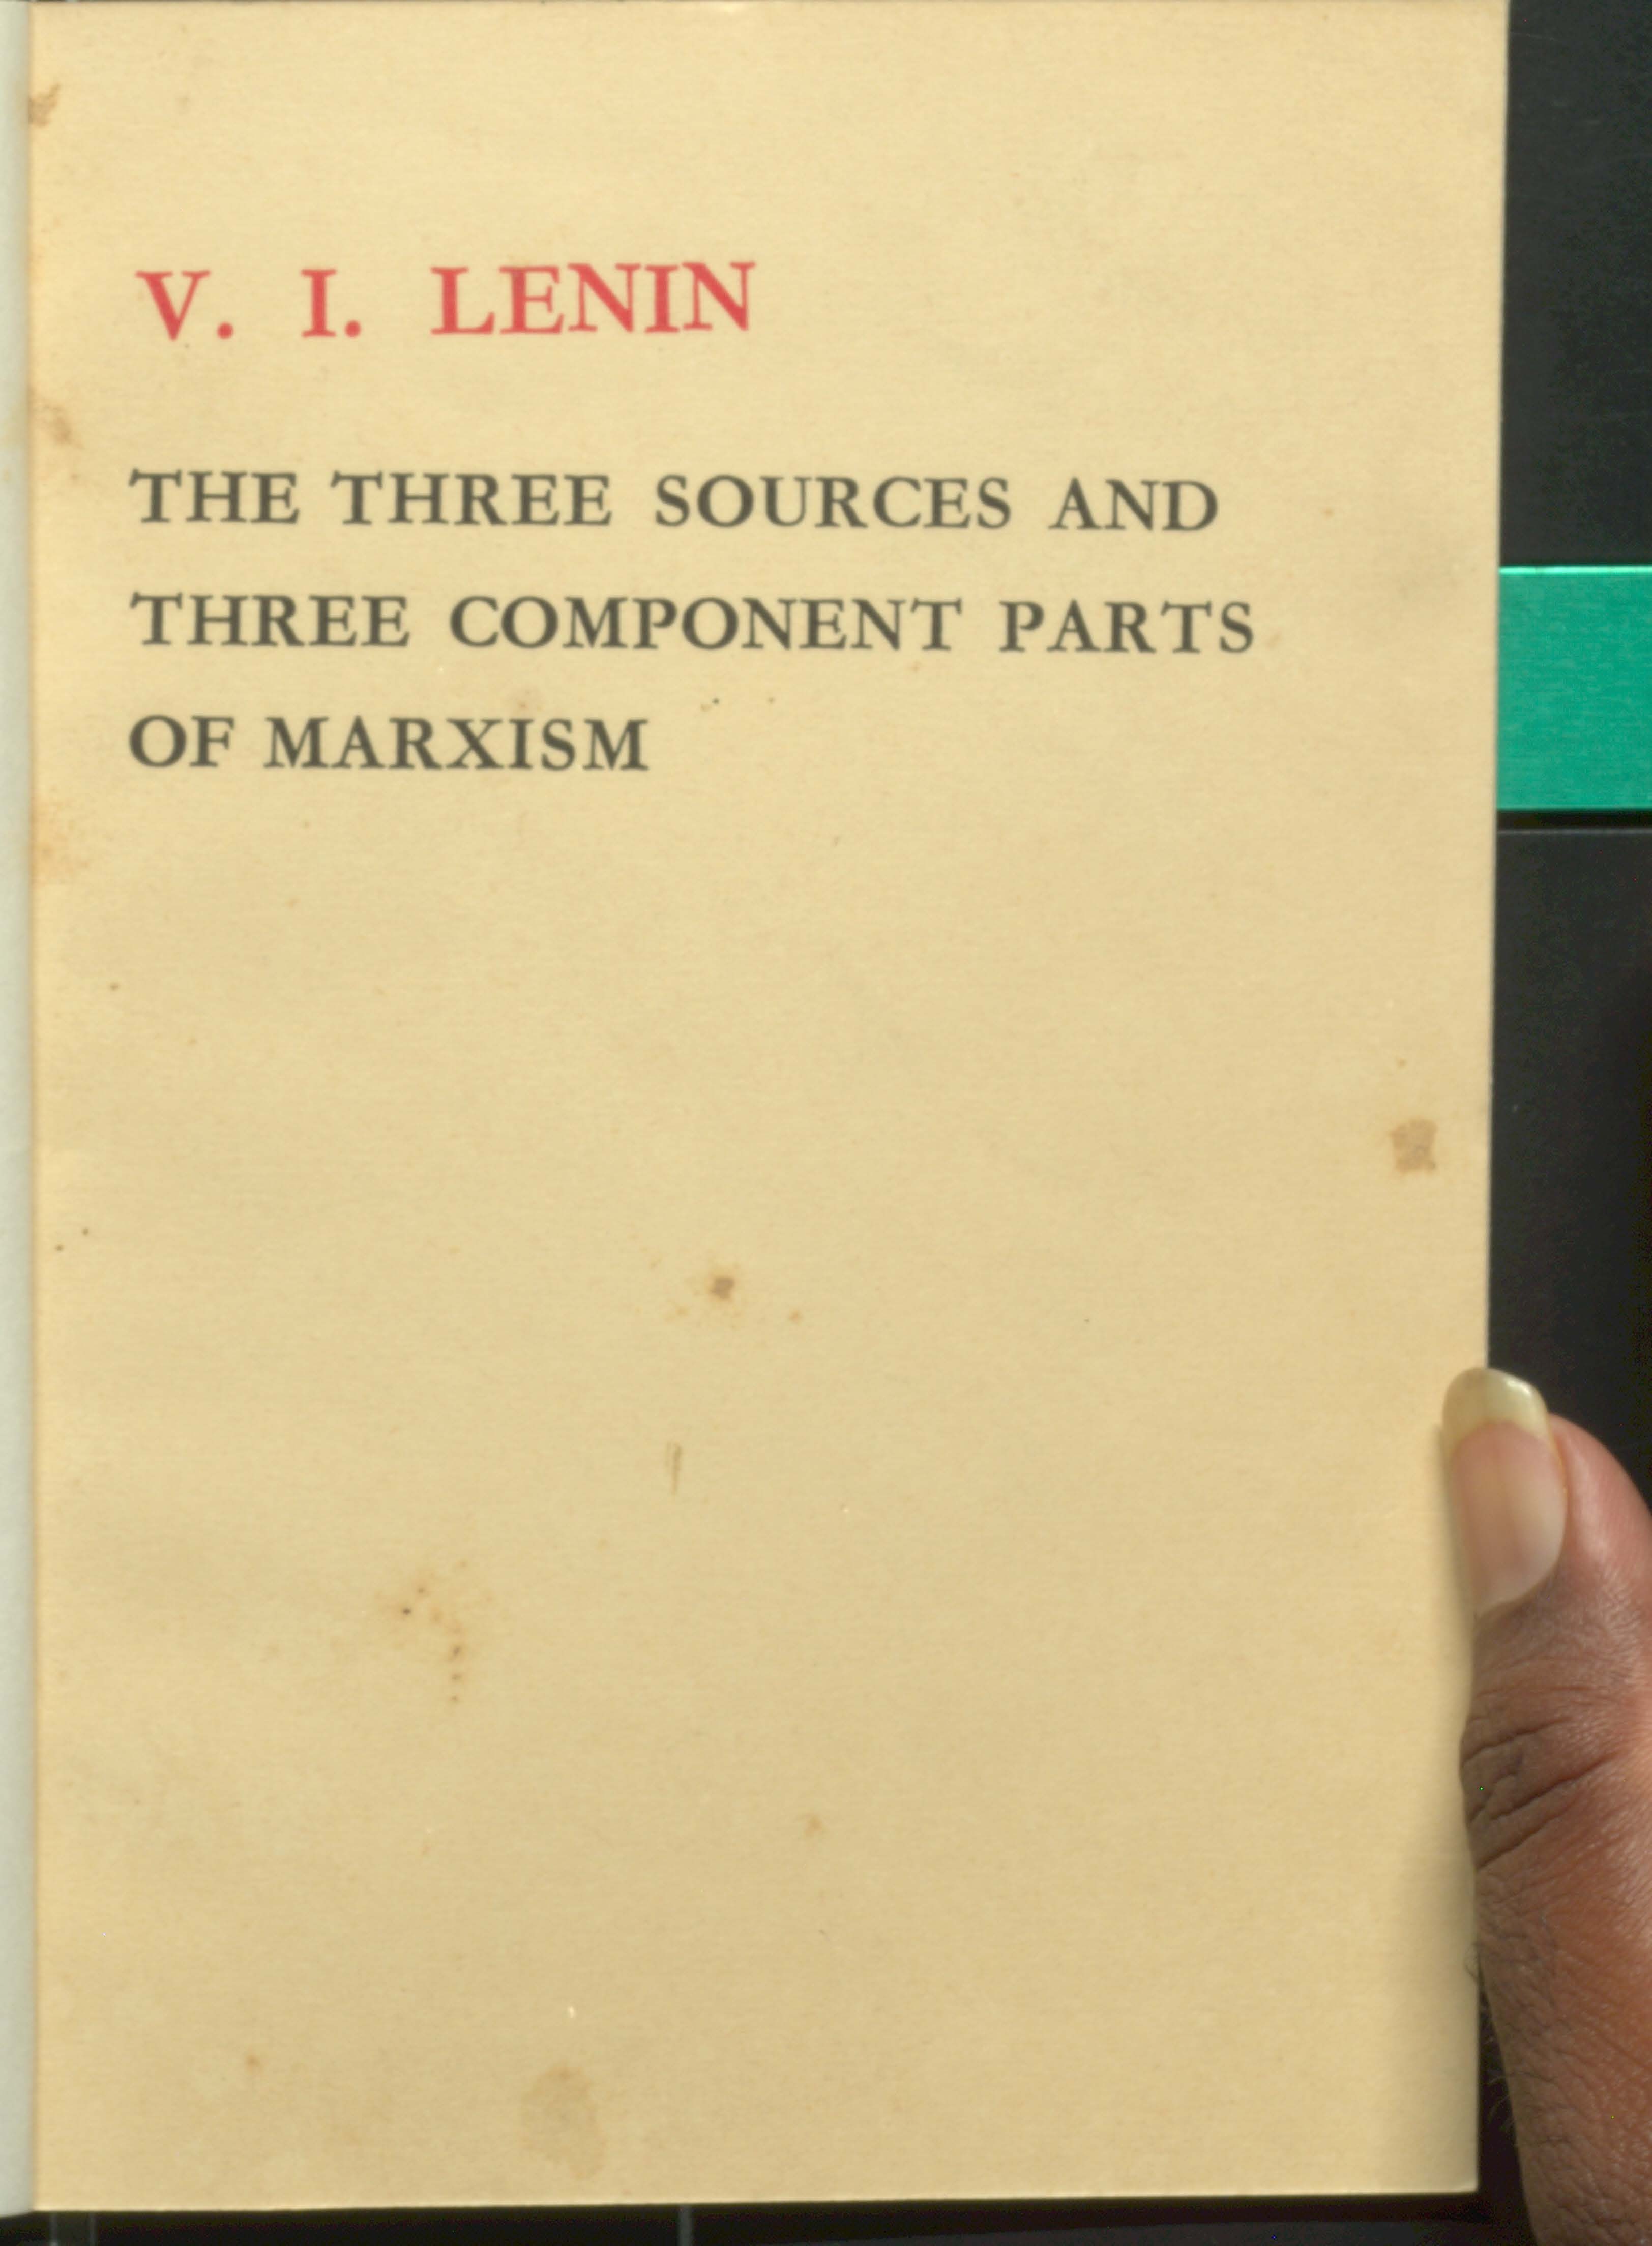 The three sources and three component parts of marxism